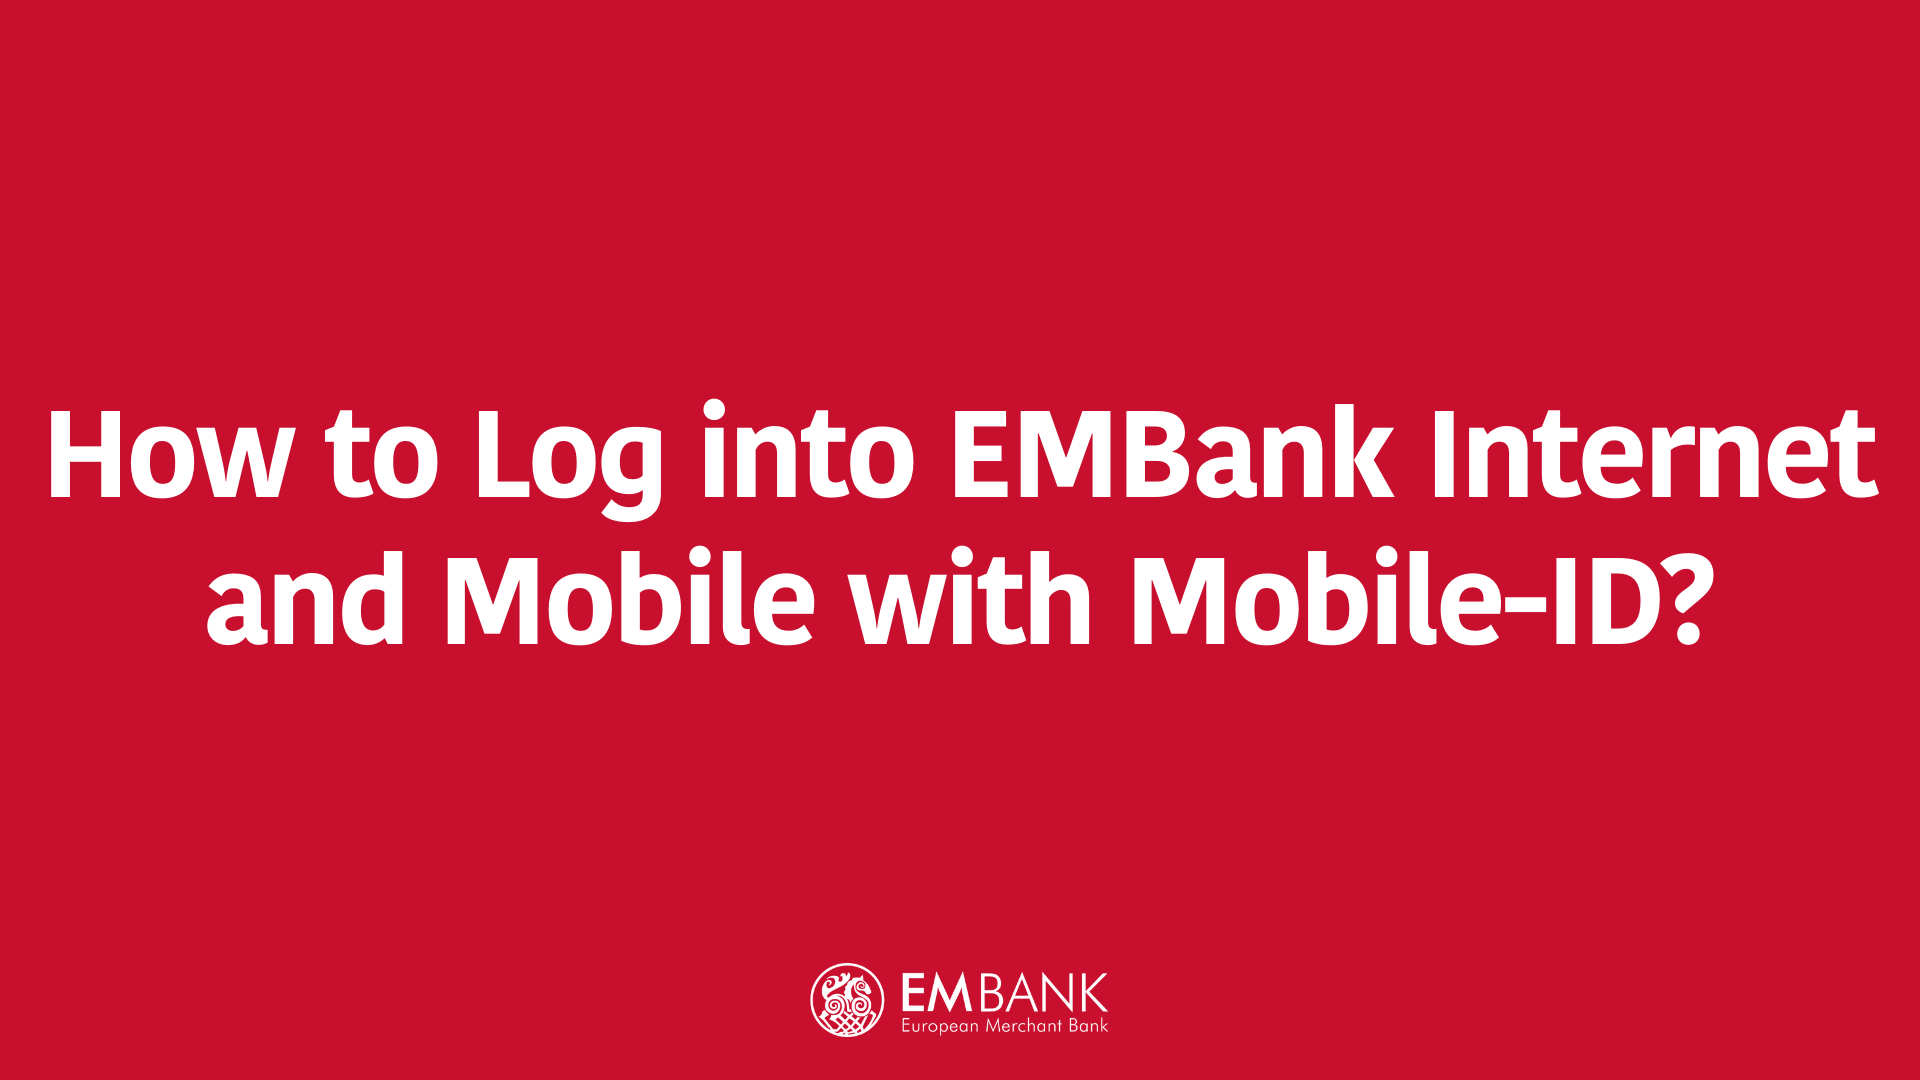 How to Log into EMBank Internet and Mobile with Mobile-ID?